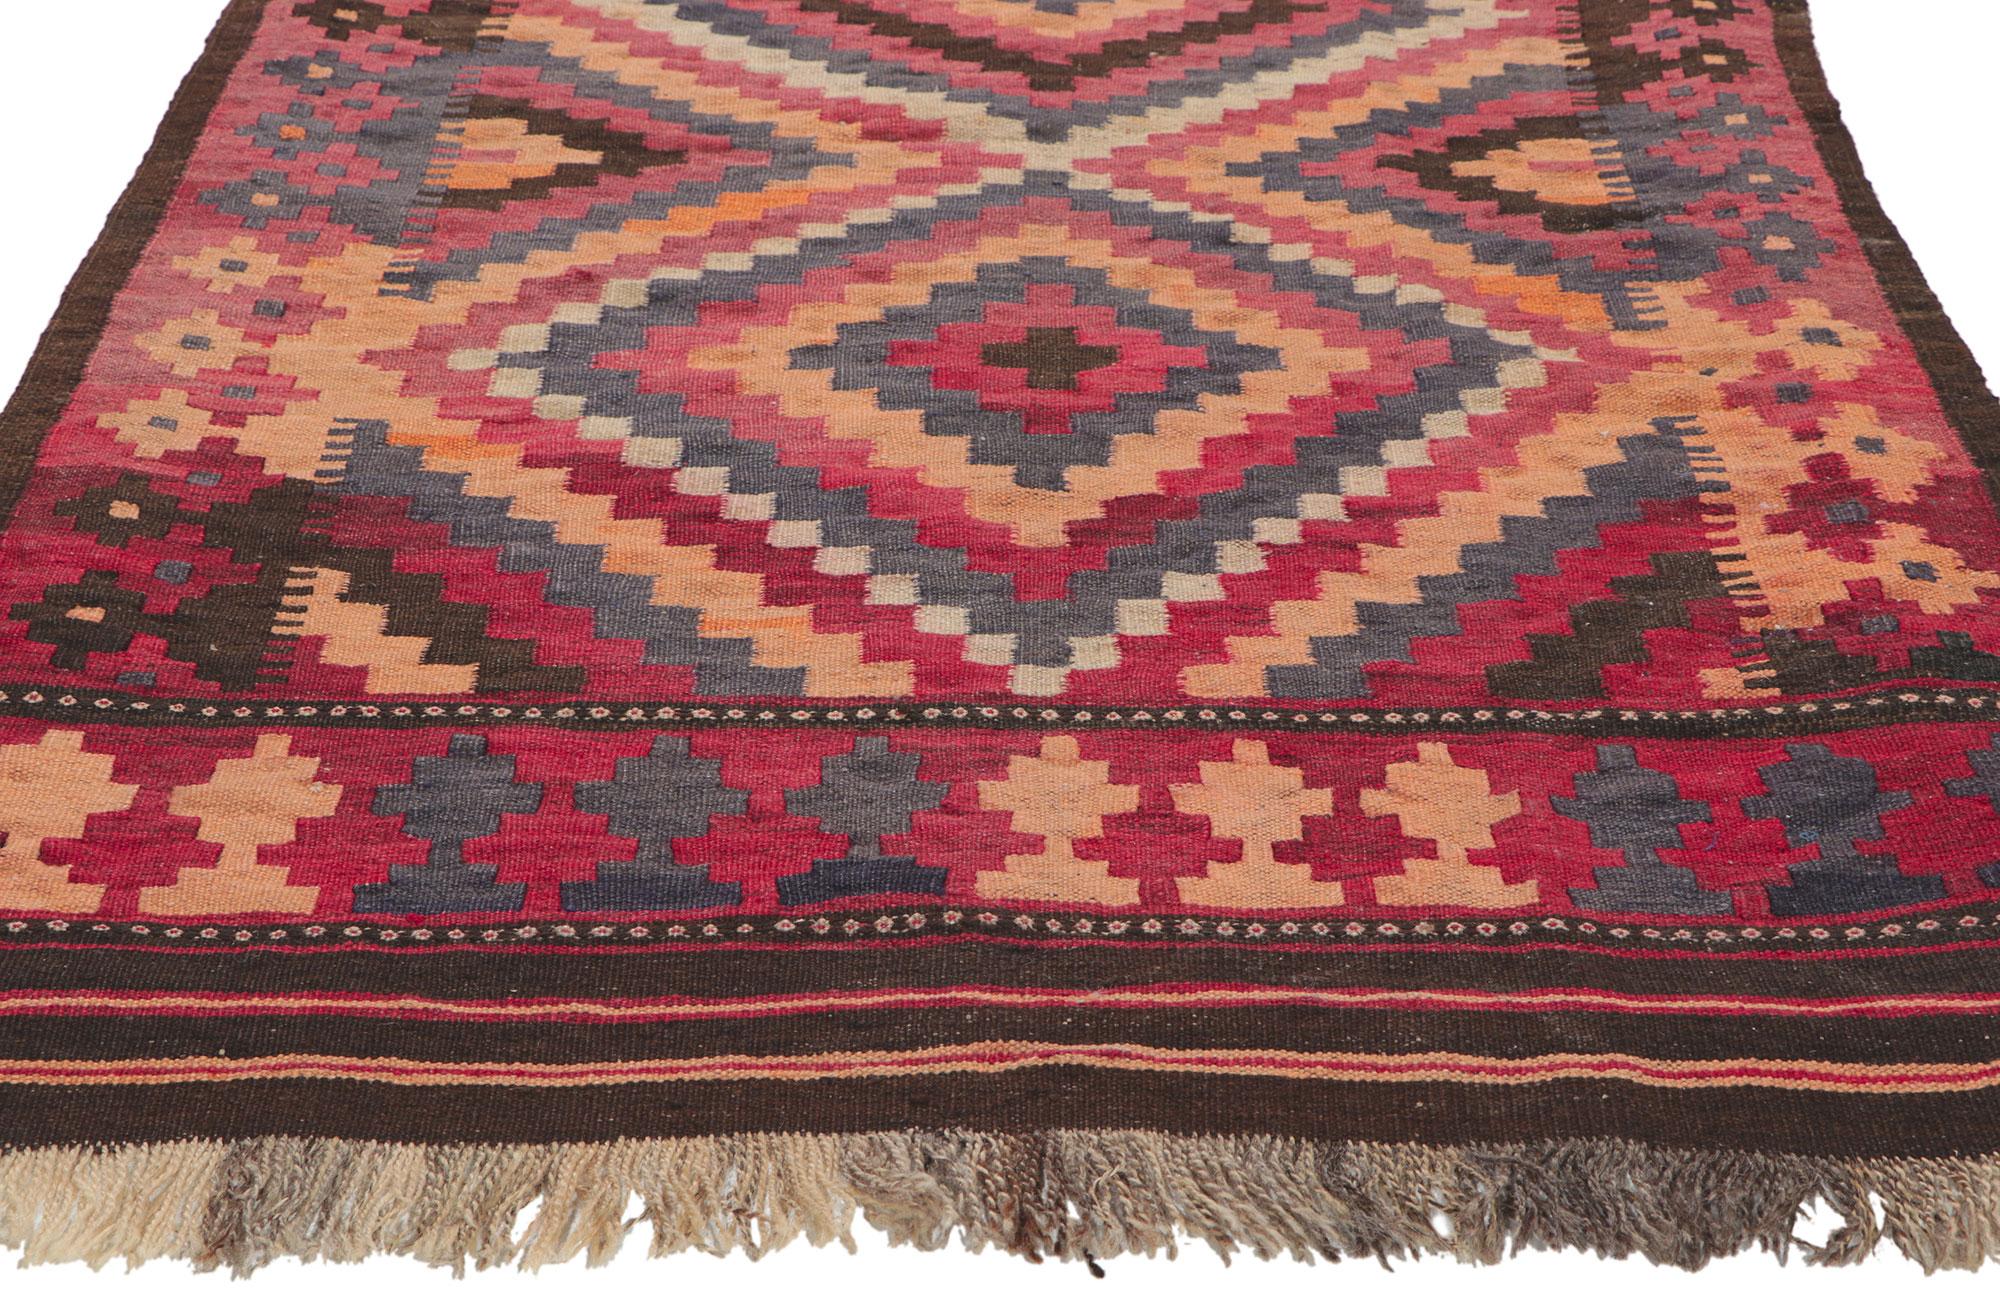 Vintage Afghan Kilim Rug with Tribal Style In Good Condition For Sale In Dallas, TX